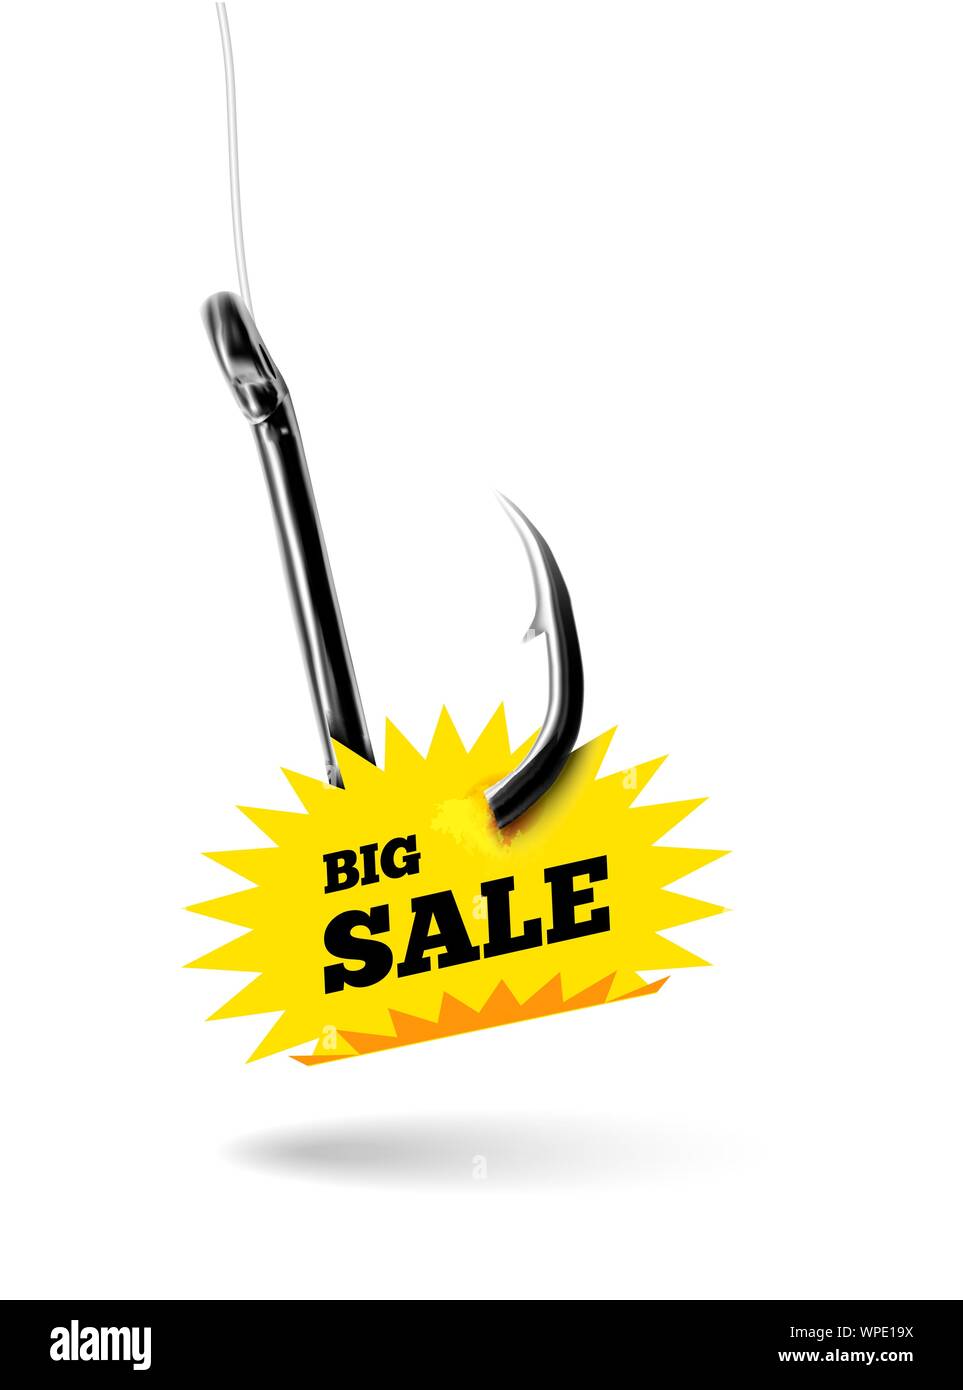 https://c8.alamy.com/comp/WPE19X/fishing-hook-with-label-price-tag-with-text-big-sale-vector-illustration-WPE19X.jpg